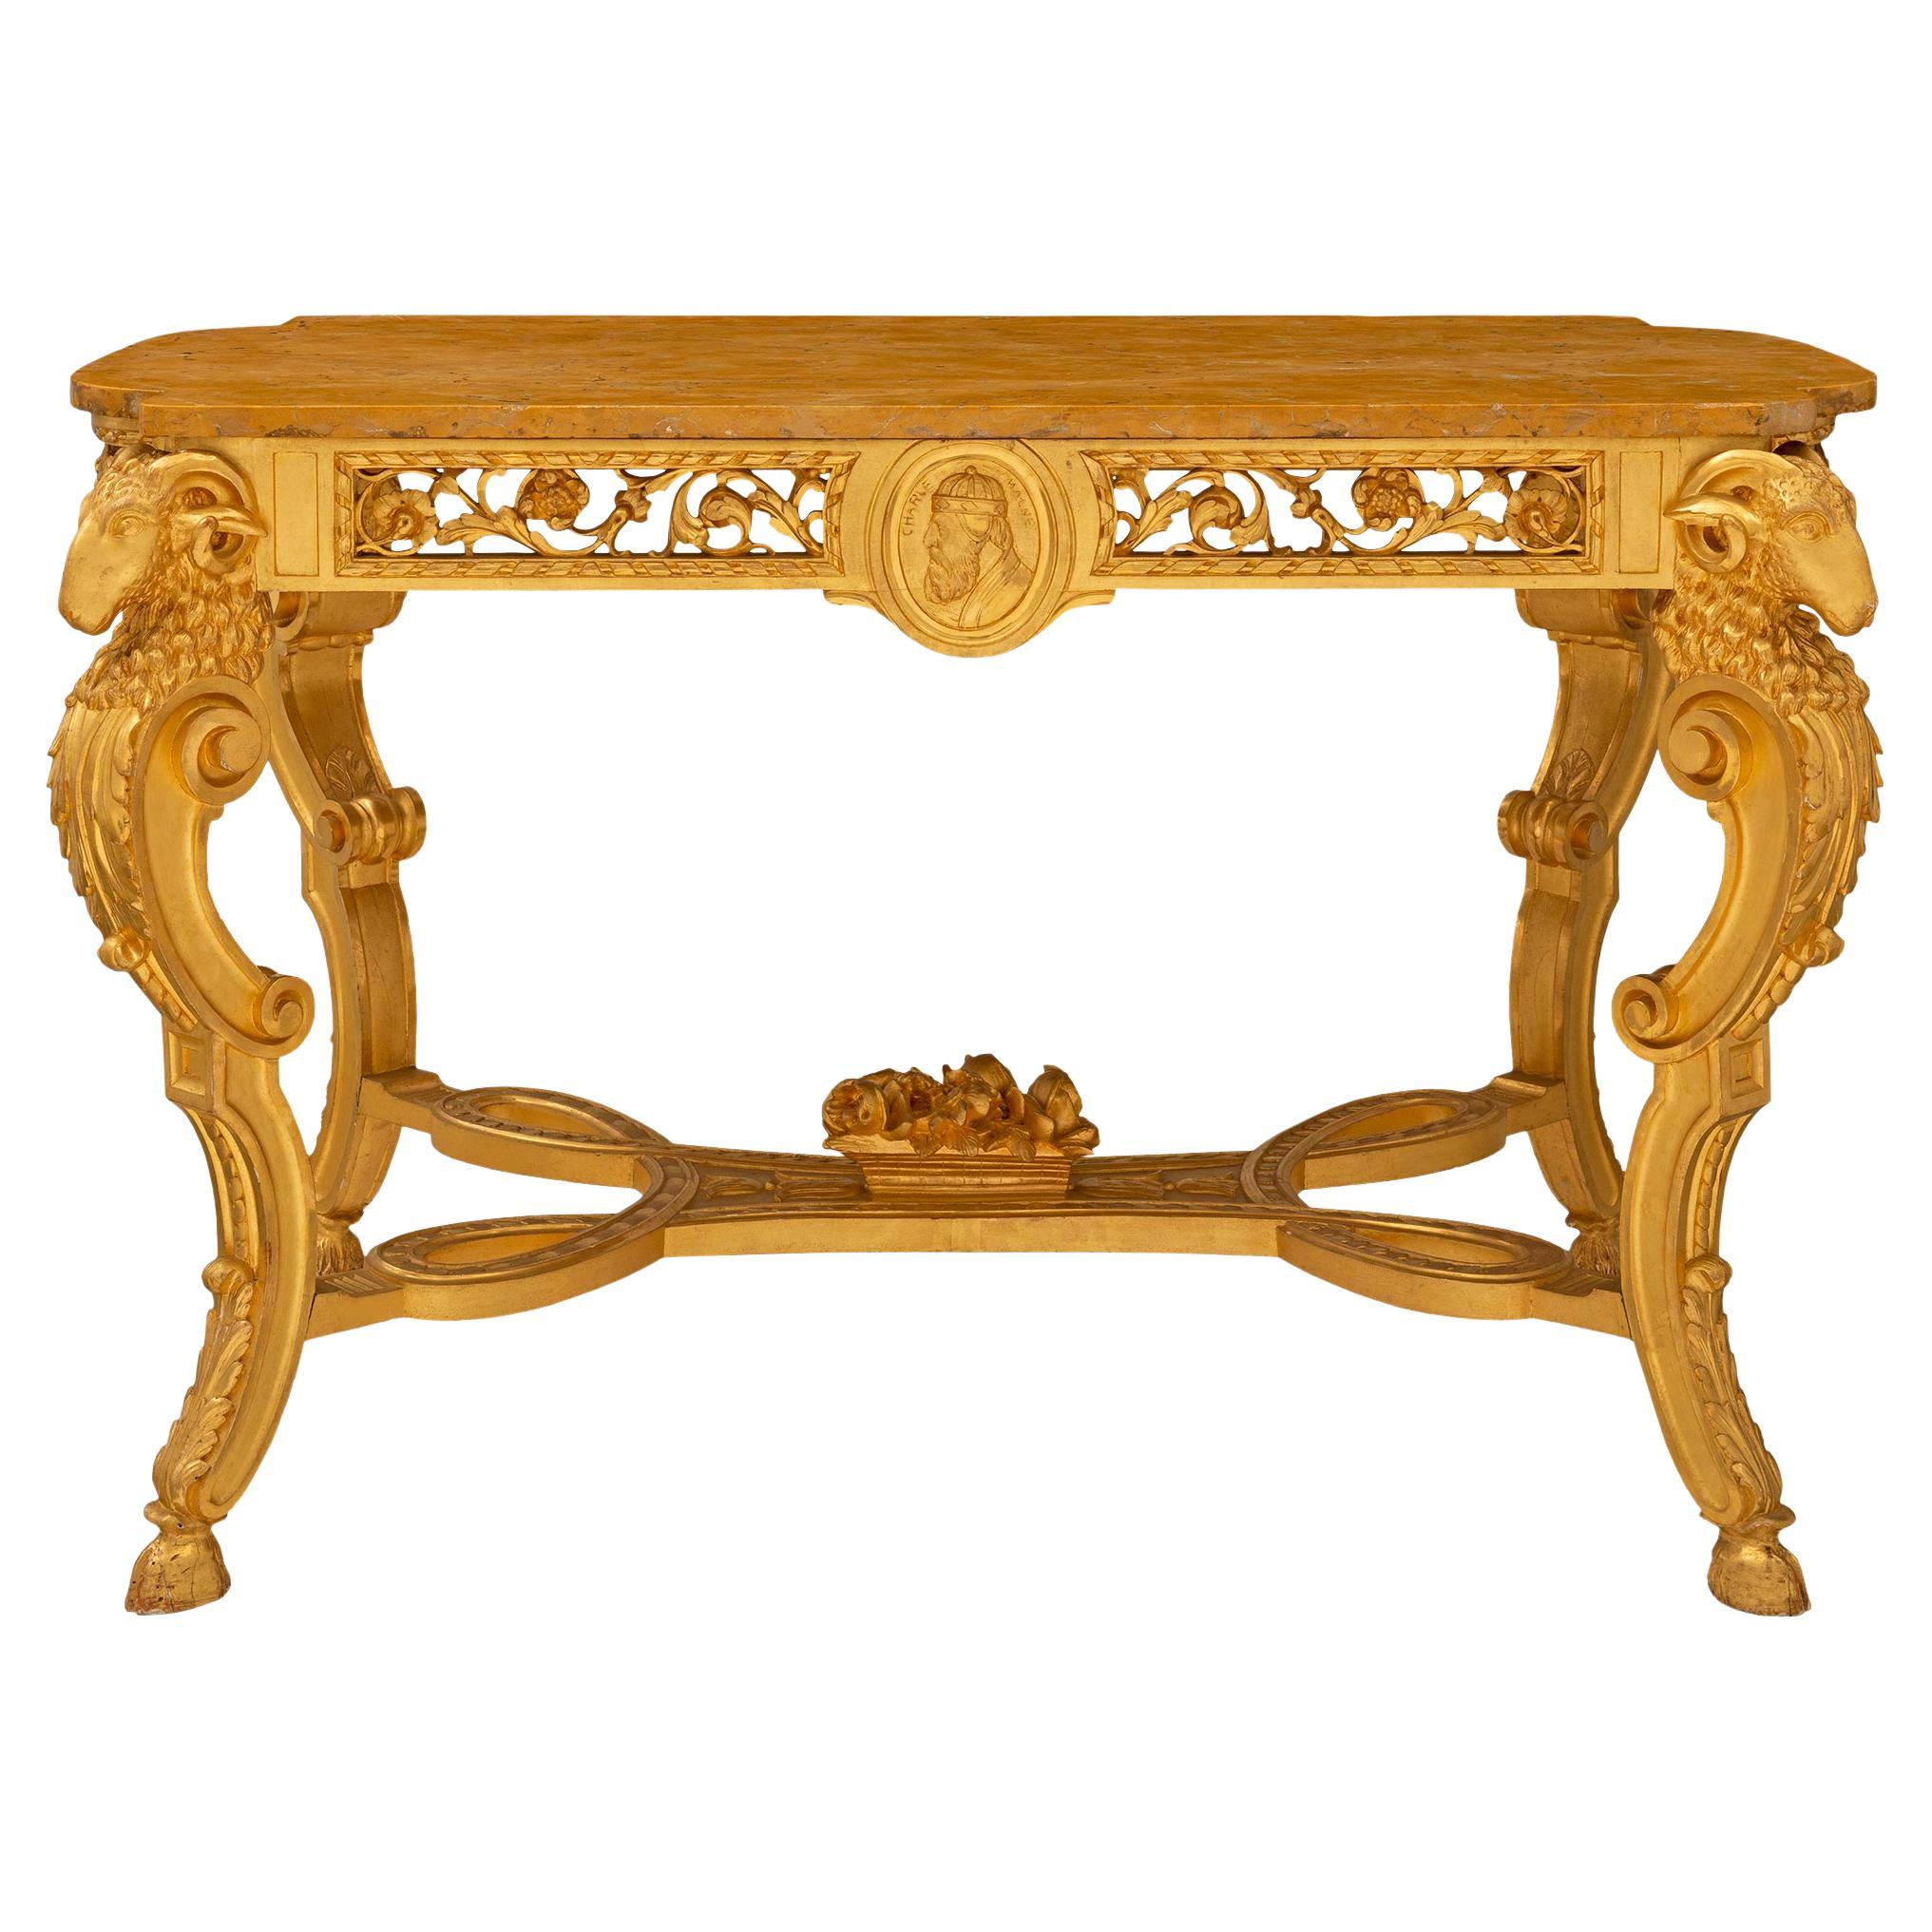 Italian 19th Century Giltwood and Giallo Reale Marble Center Table